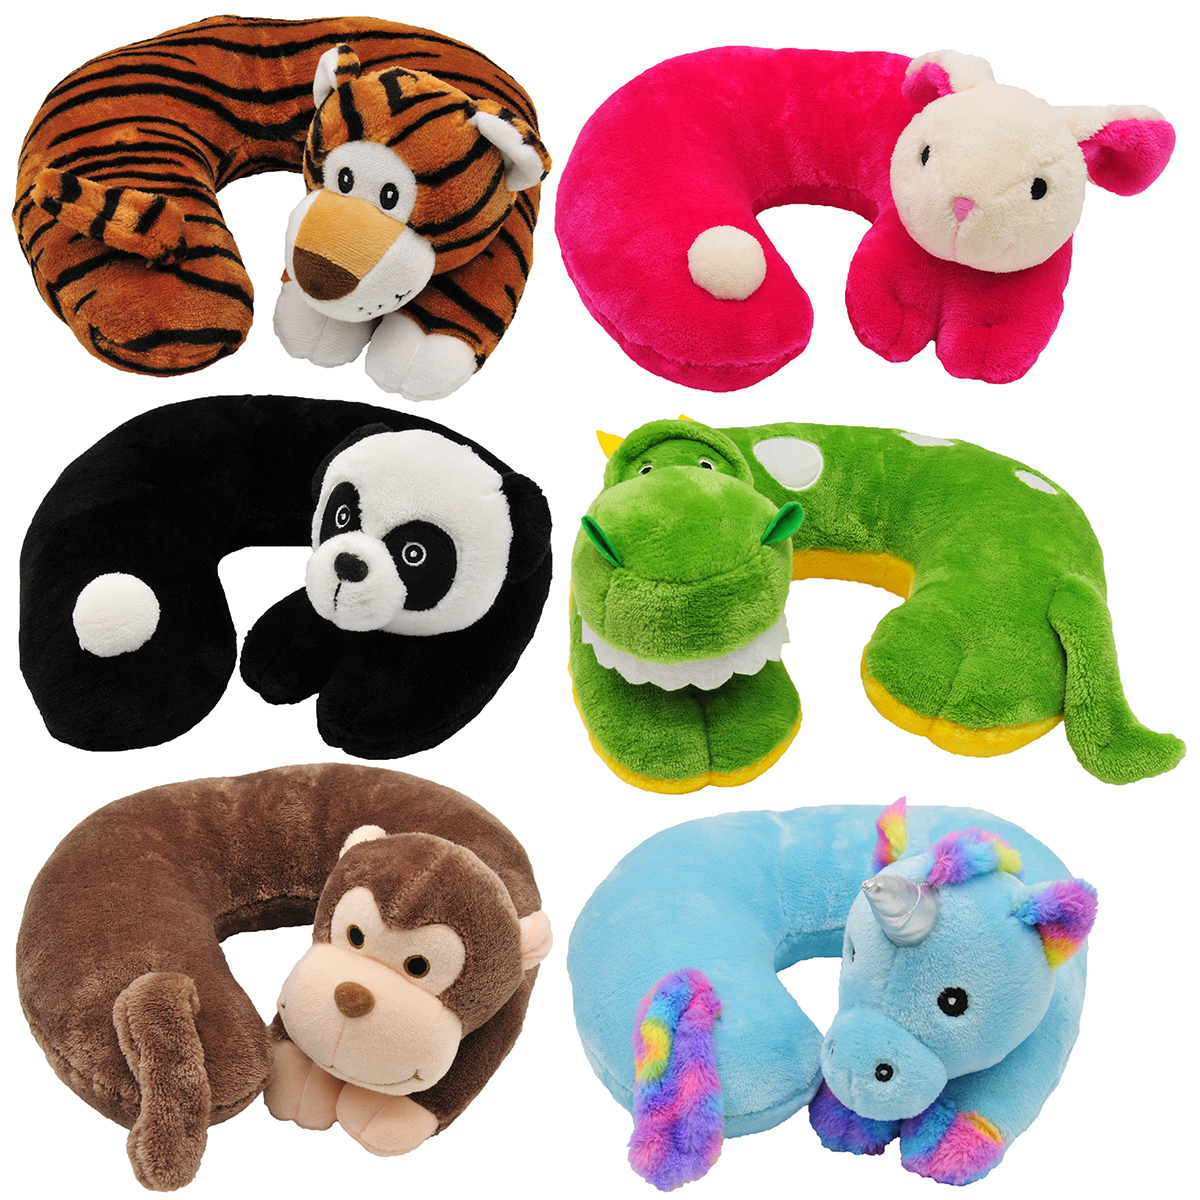 BlackCanyon Outfitters Childrens Neck Pillow BCO6878 Child Size Travel Neck Pillow Cute Foam U Shaped Animal Pillow for Airplane